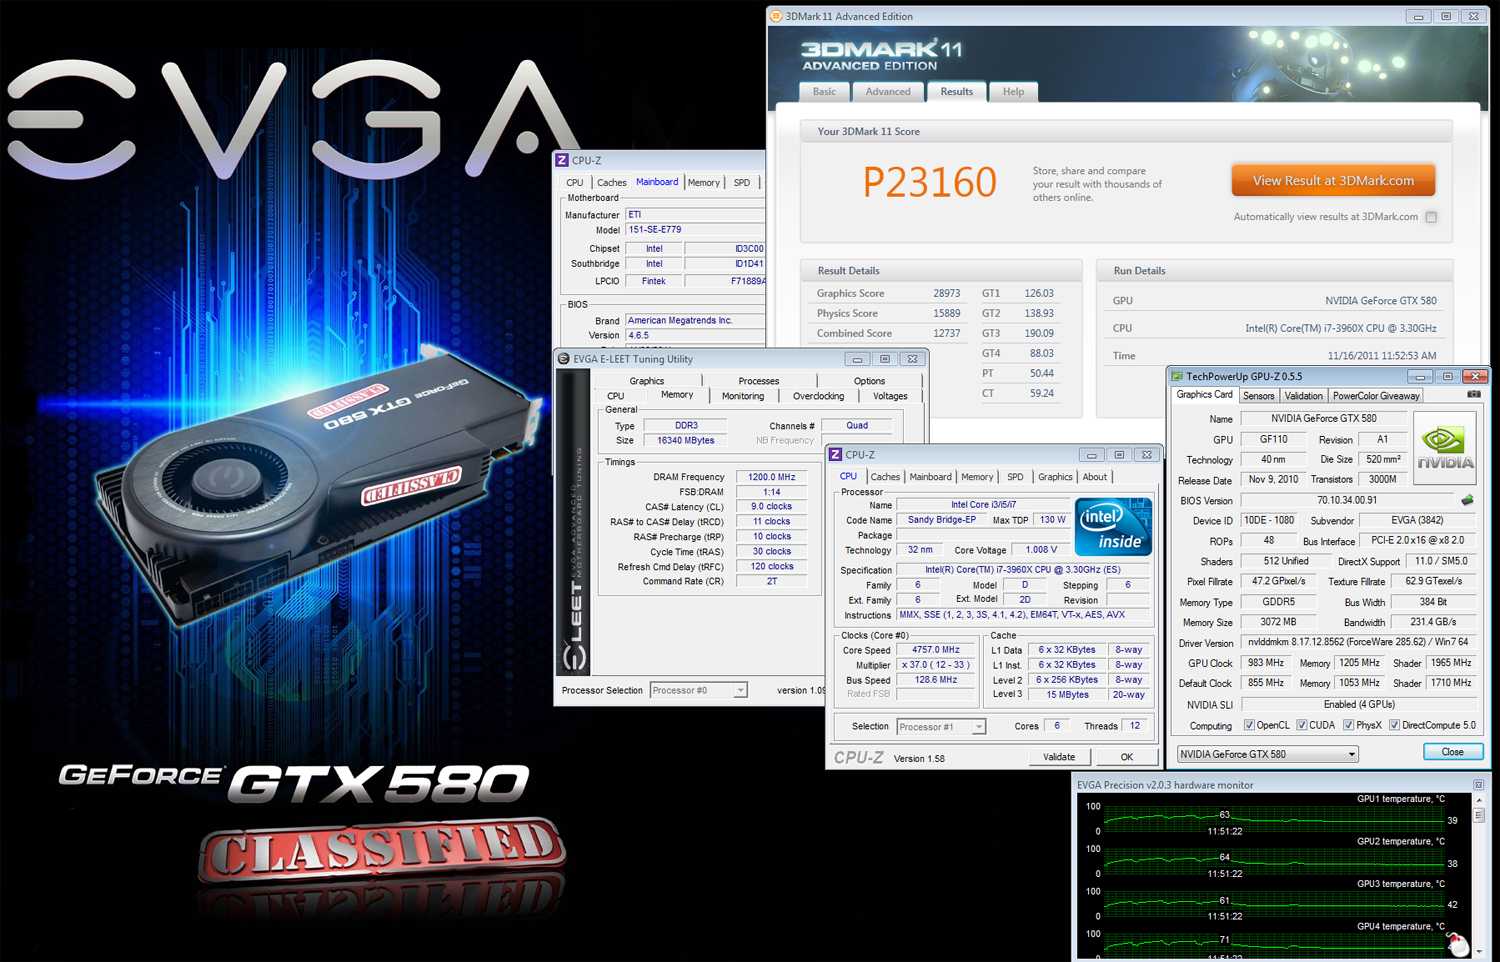 Asus geforce gtx 580 directcu ii vs evga geforce gtx 580 classified ultra: what is the difference?